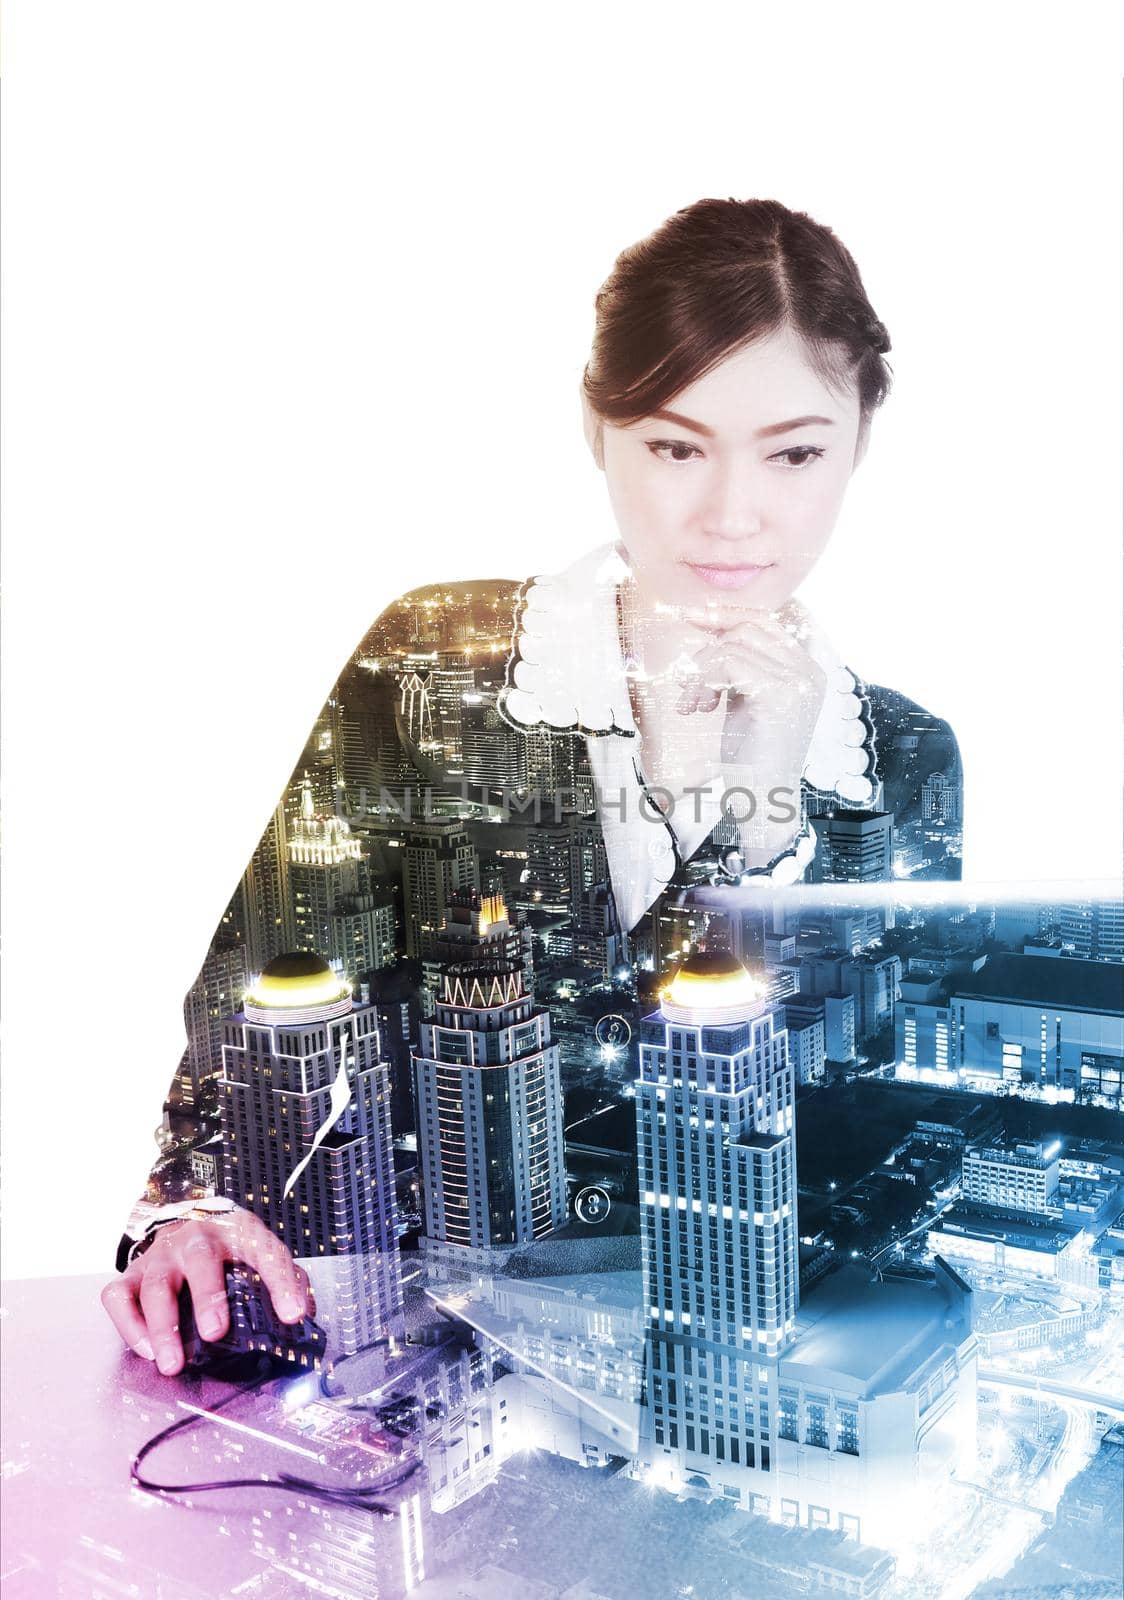 Double exposure of business woman working with laptop against the city isolated on white background